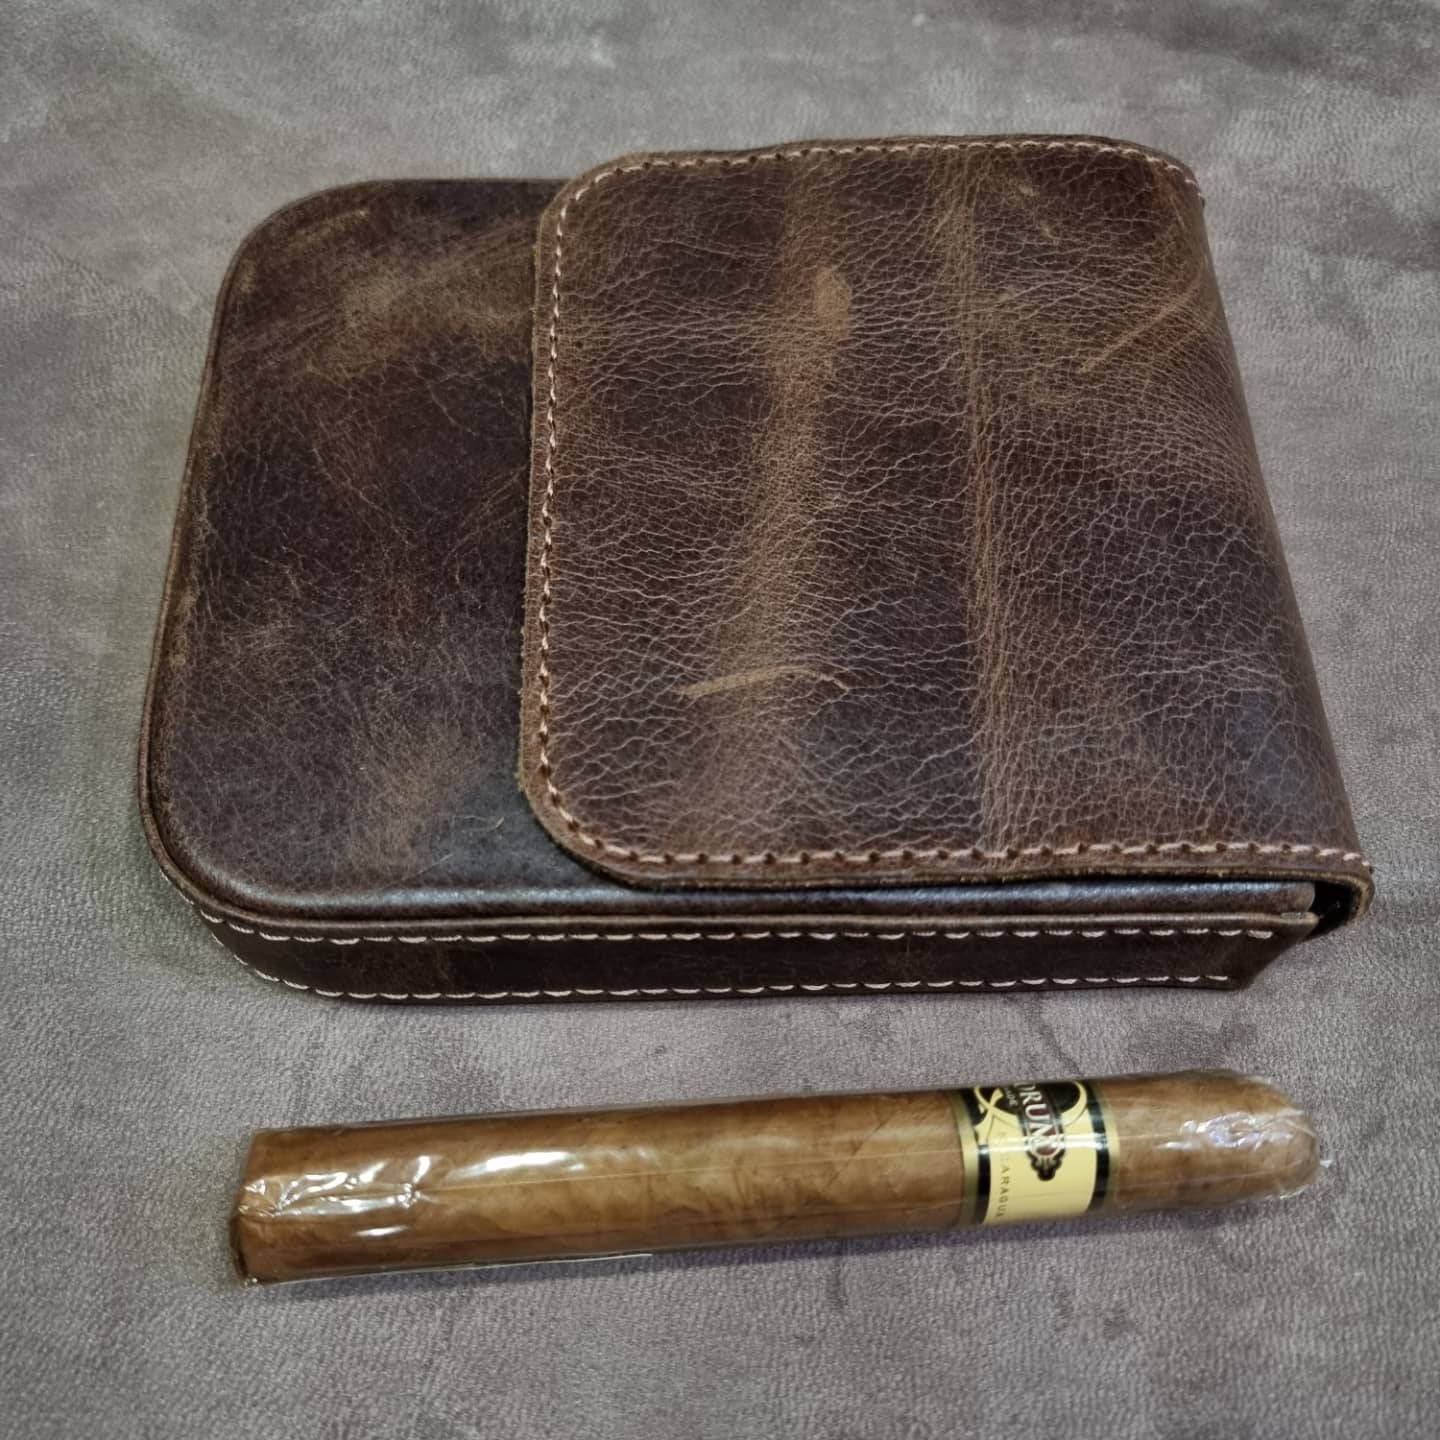 Handmade luxury leather cigar case - indian leather craft